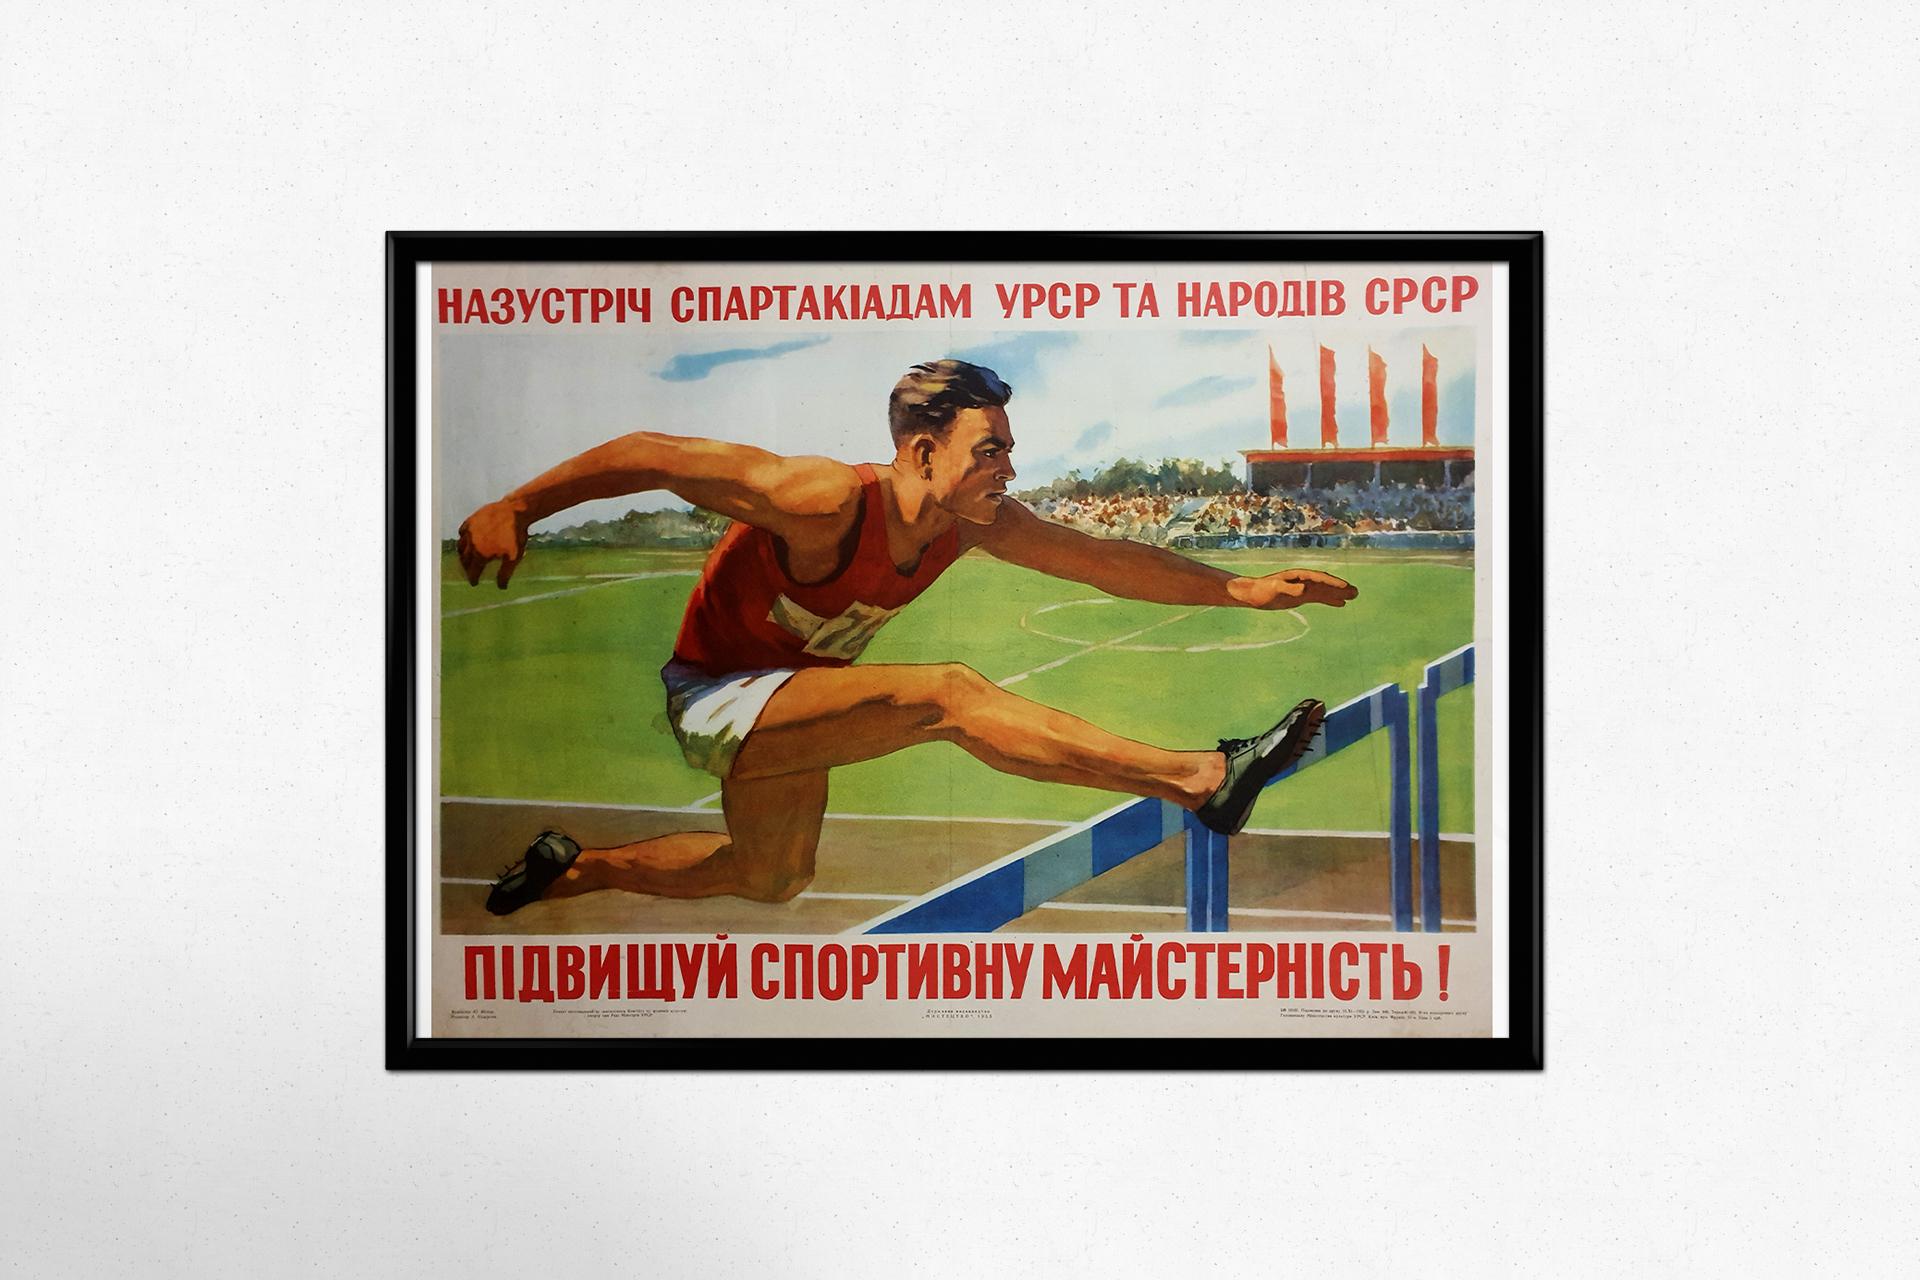 Beautiful Soviet poster made in 1955.

The Spartakiad was an international sports event that was sponsored by the Soviet Union. Five international Spartakiades were held from 1928 to 1937. Later Spartakiads were organized as national sport events of